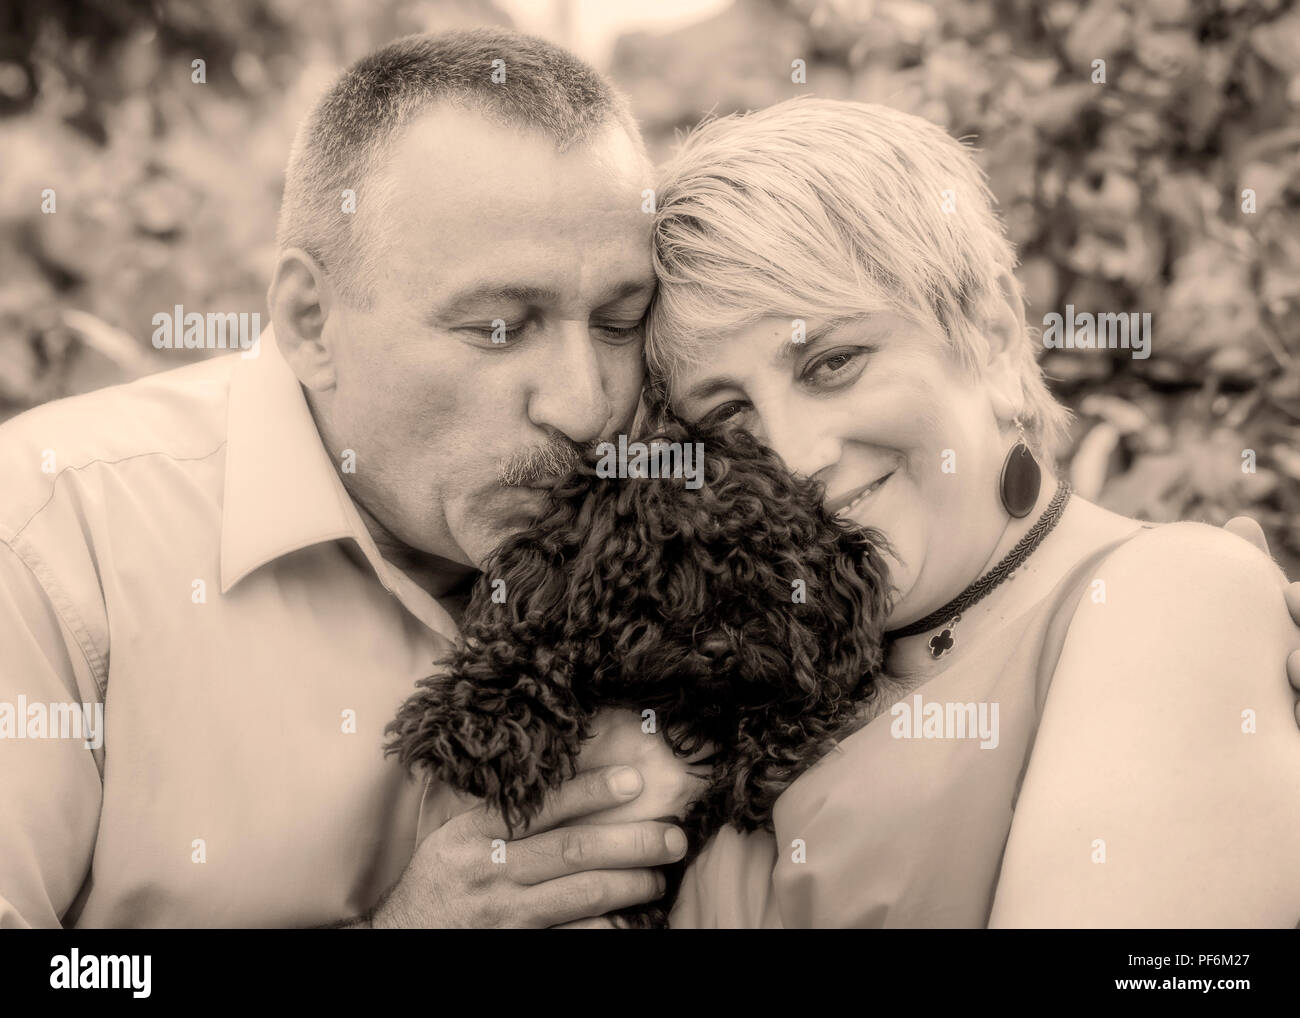 The beautiful romantic couple is having fun with their small dog Stock Photo